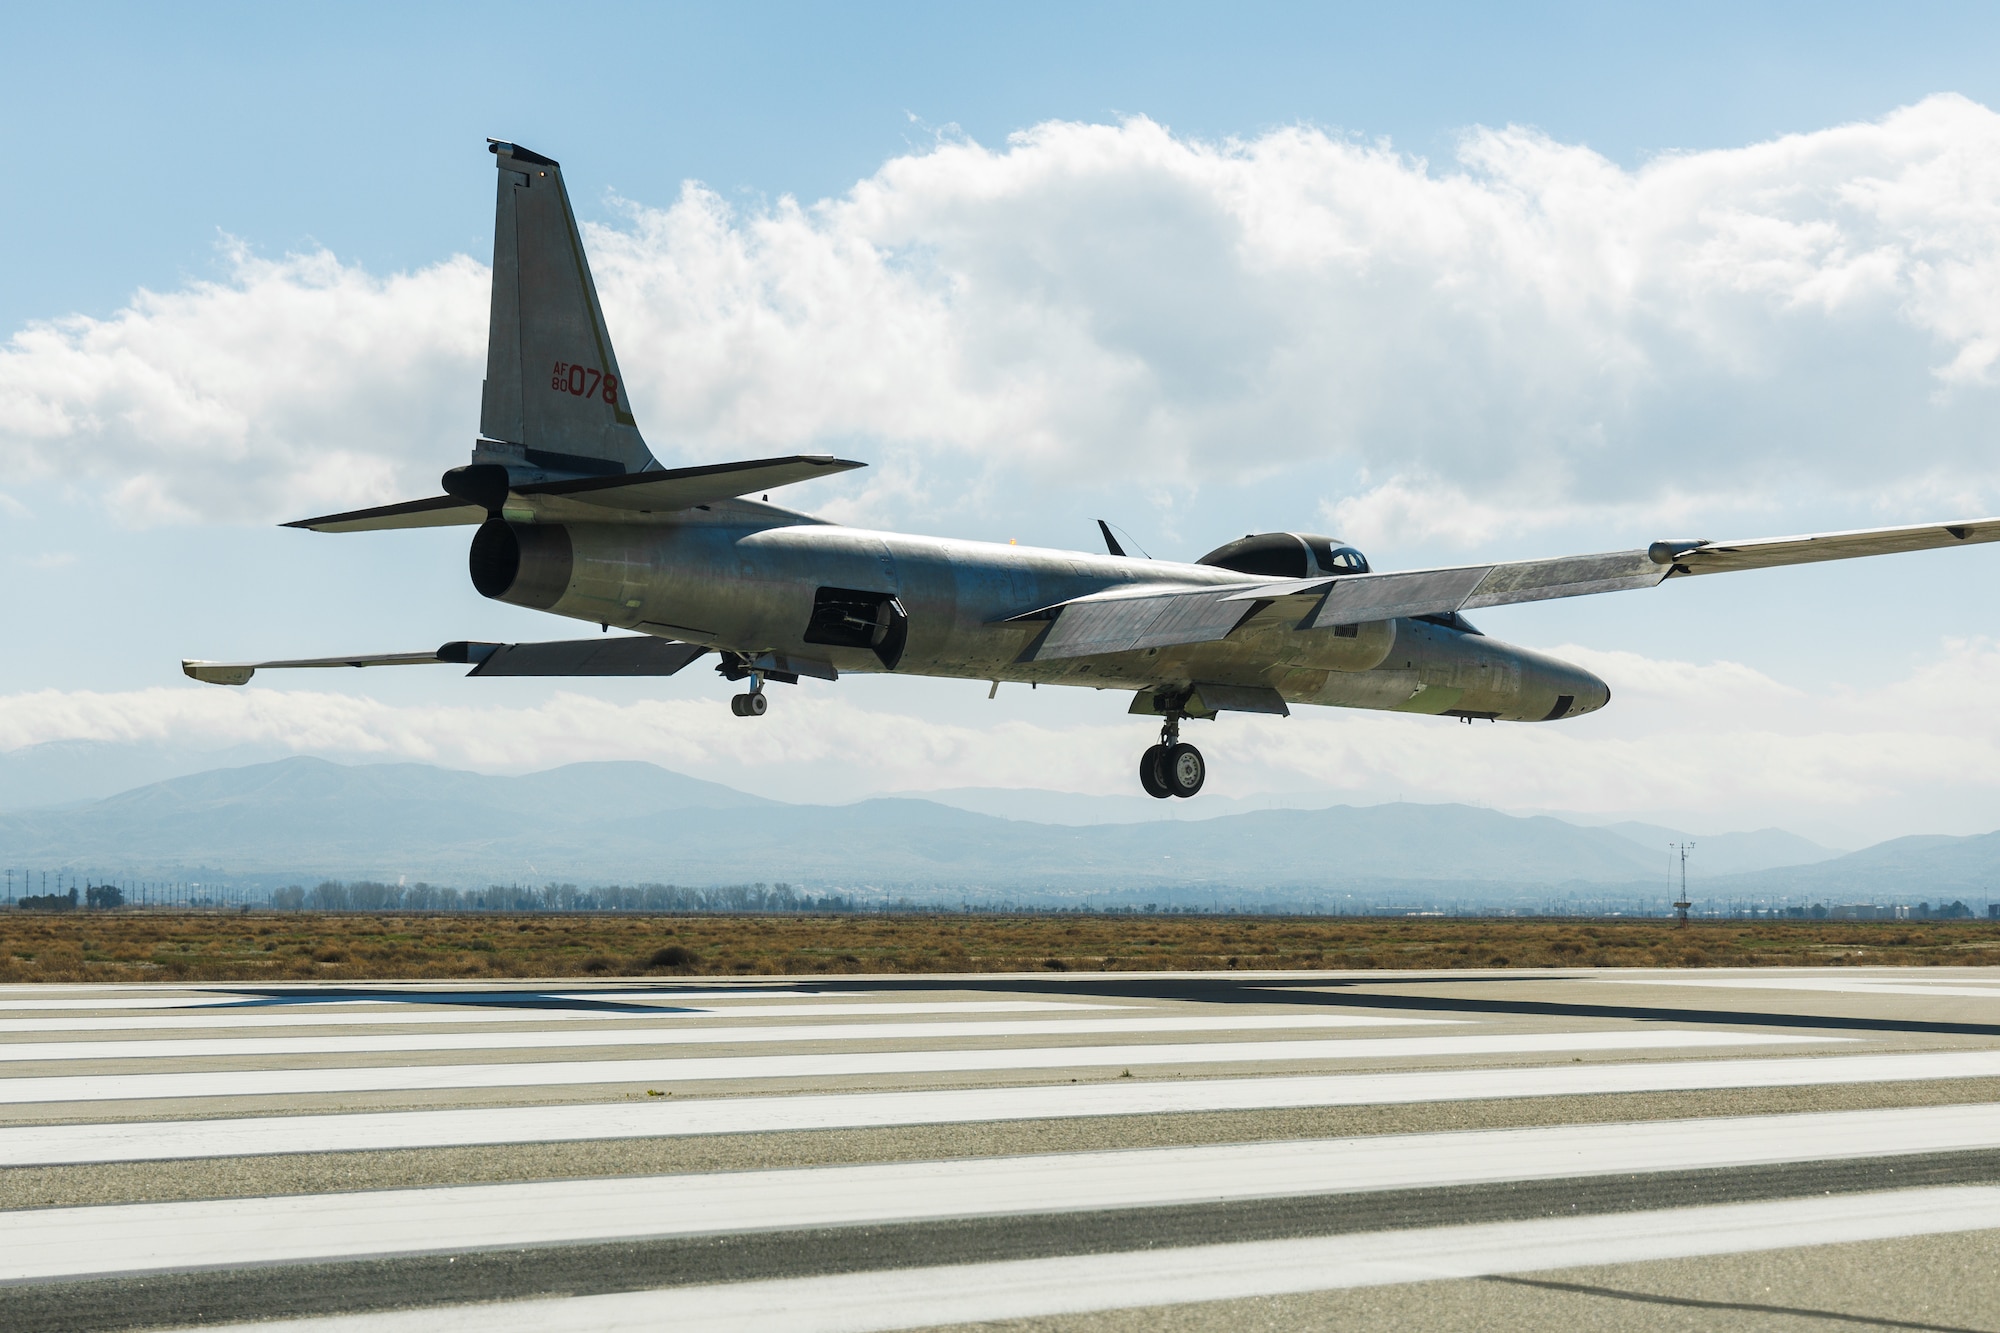 A TU-2S Dragon Lady assigned to the 9th Reconnaissance Wing, Beale Air Force Base, Calif., arrives at USAF Operating Location Plant 42 in Palmdale, California, to receive final paint coatings, Feb. 29. The aircraft returned to flight after nearly two years through the collaboration of the Air Force Life Cycle Management Center, 412th Test Wing at Edwards and Lockheed Martin Corporation. (Air Force photo by Richard Gonzales)